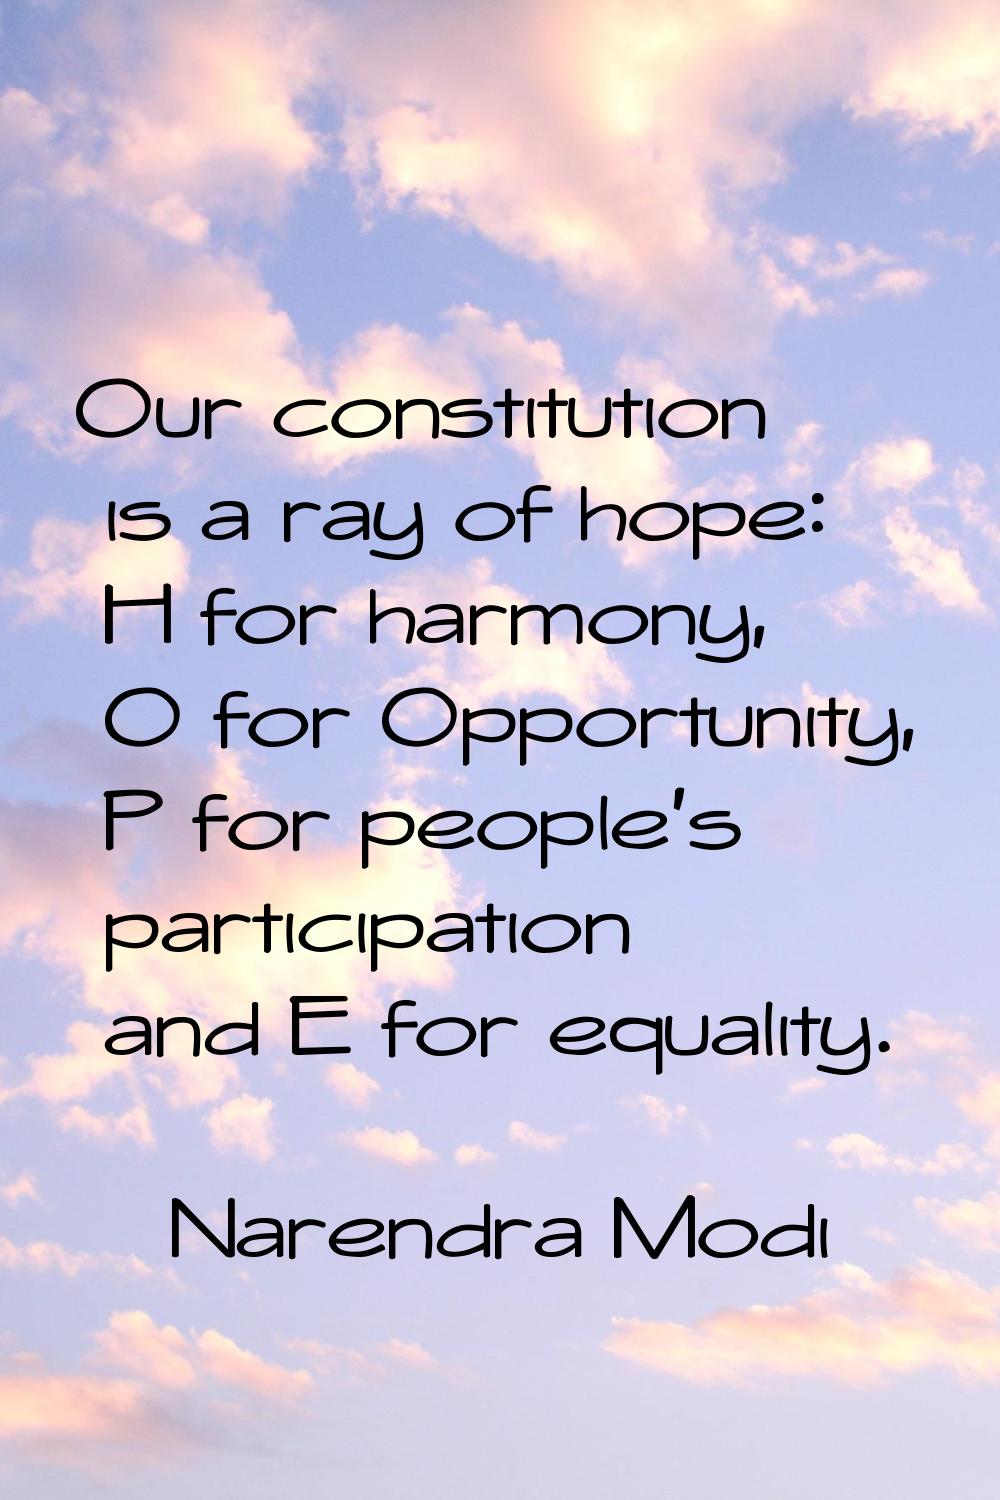 Our constitution is a ray of hope: H for harmony, O for Opportunity, P for people's participation a